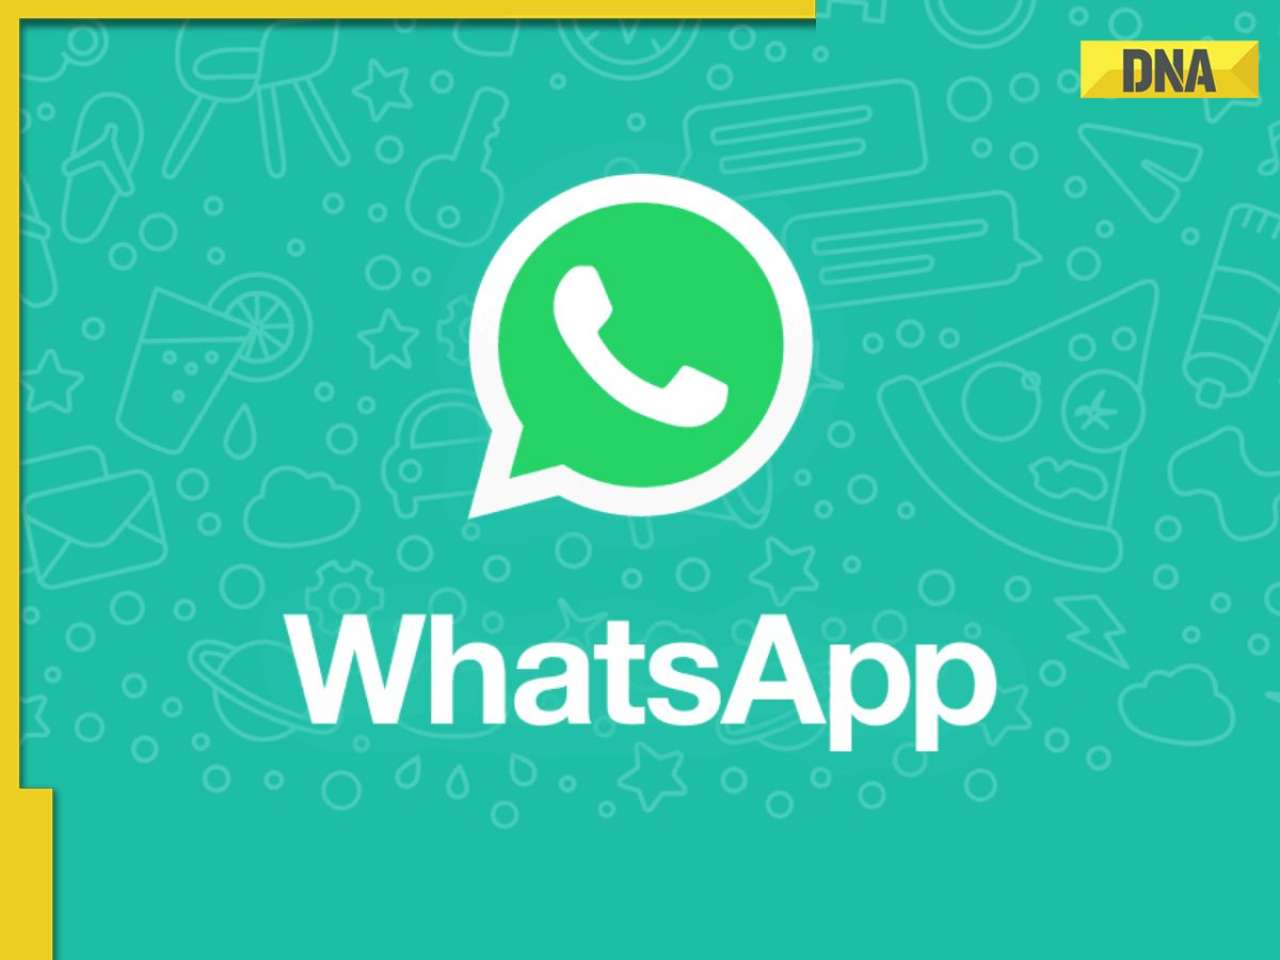 Apple users to finally get this WhatsApp feature, iPad app will be able to…